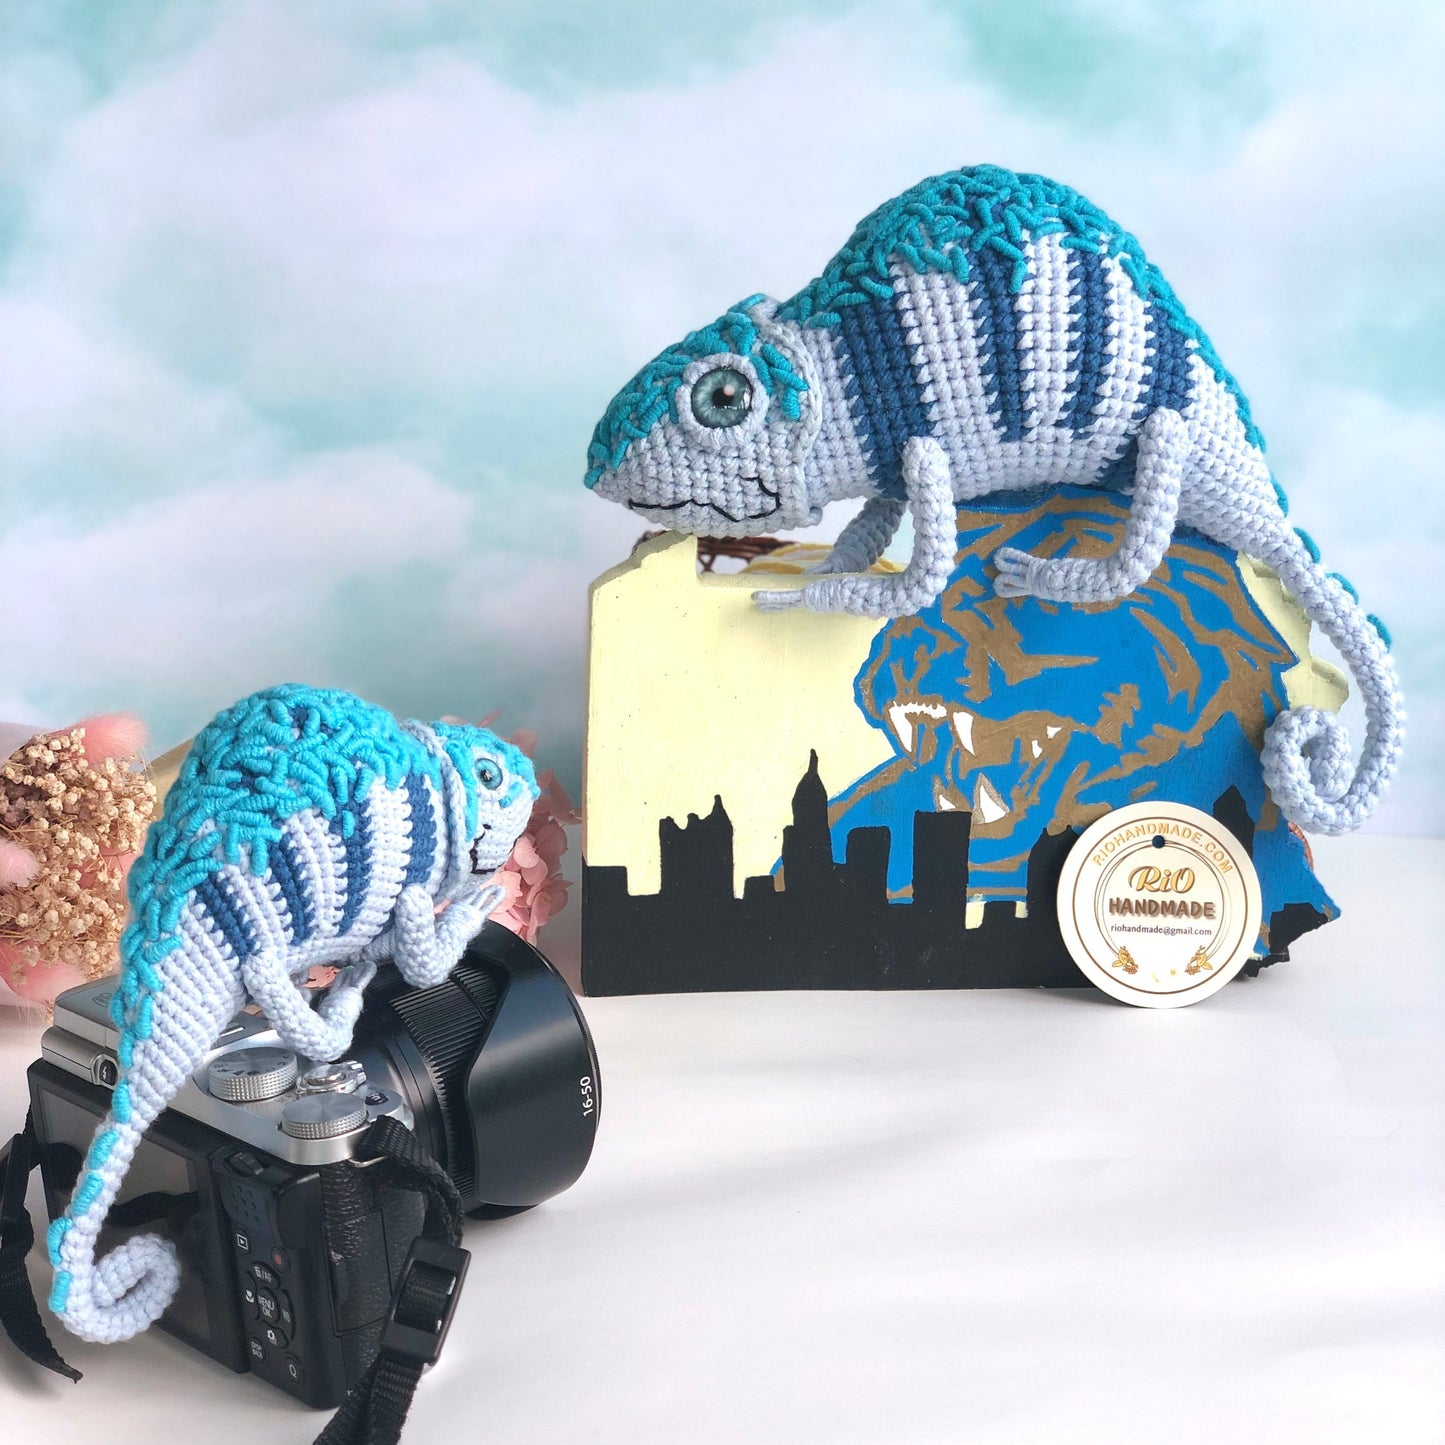 Handmade chameleon crochet, amigurumi, cute, soft toy for kid, adult hobby, perfect idea for gifts, present, craft doll